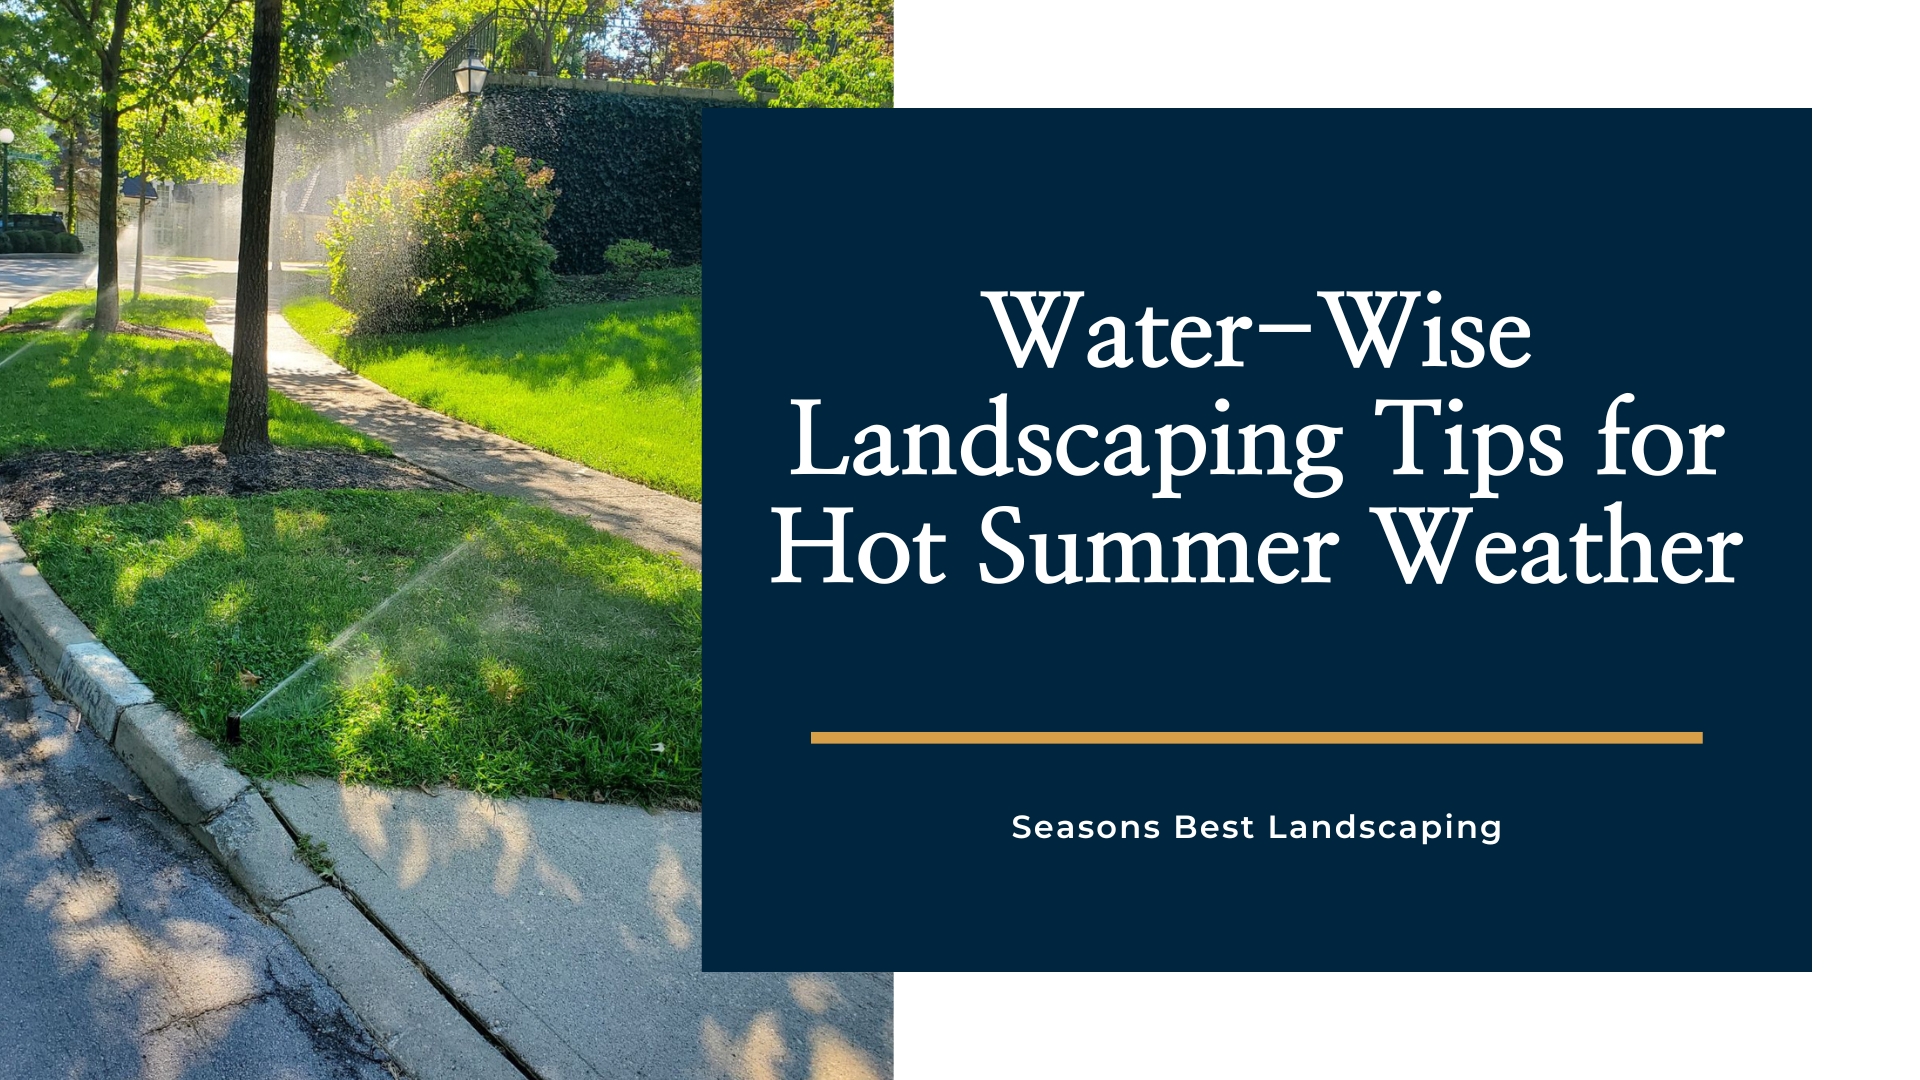 Best Time to Water Plants in Hot Weather - Seasons Best Landscaping